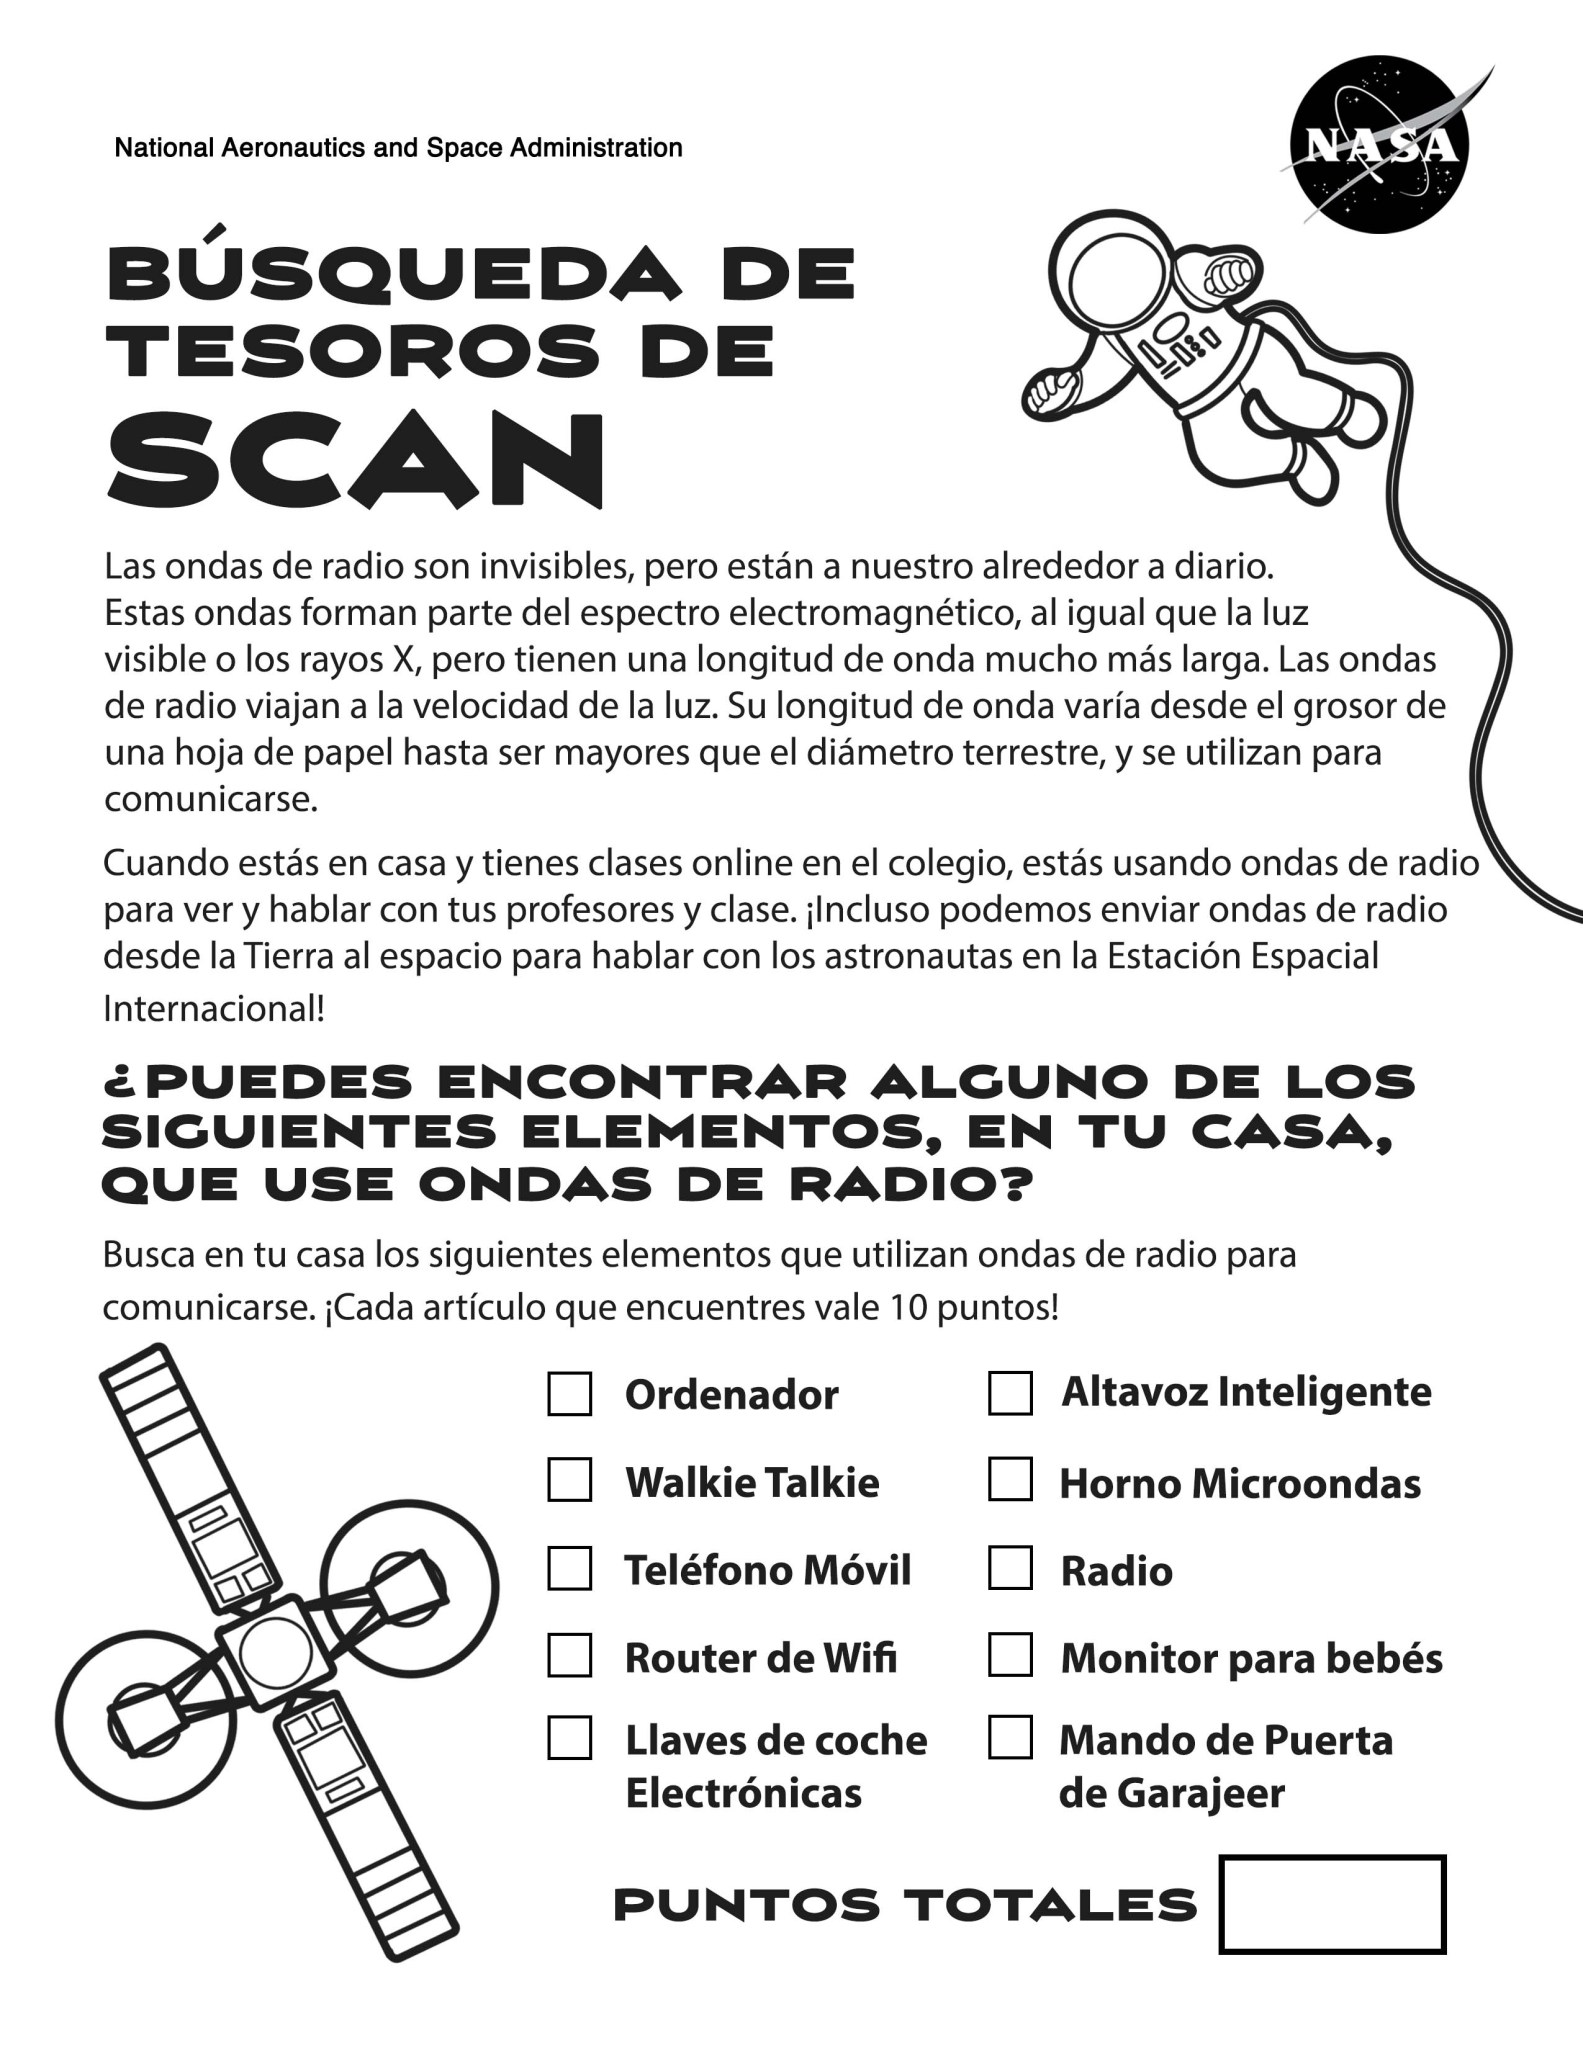 Image of a NASA Space Communications and Navigation scavenger hunt activity. The image is in black and white.